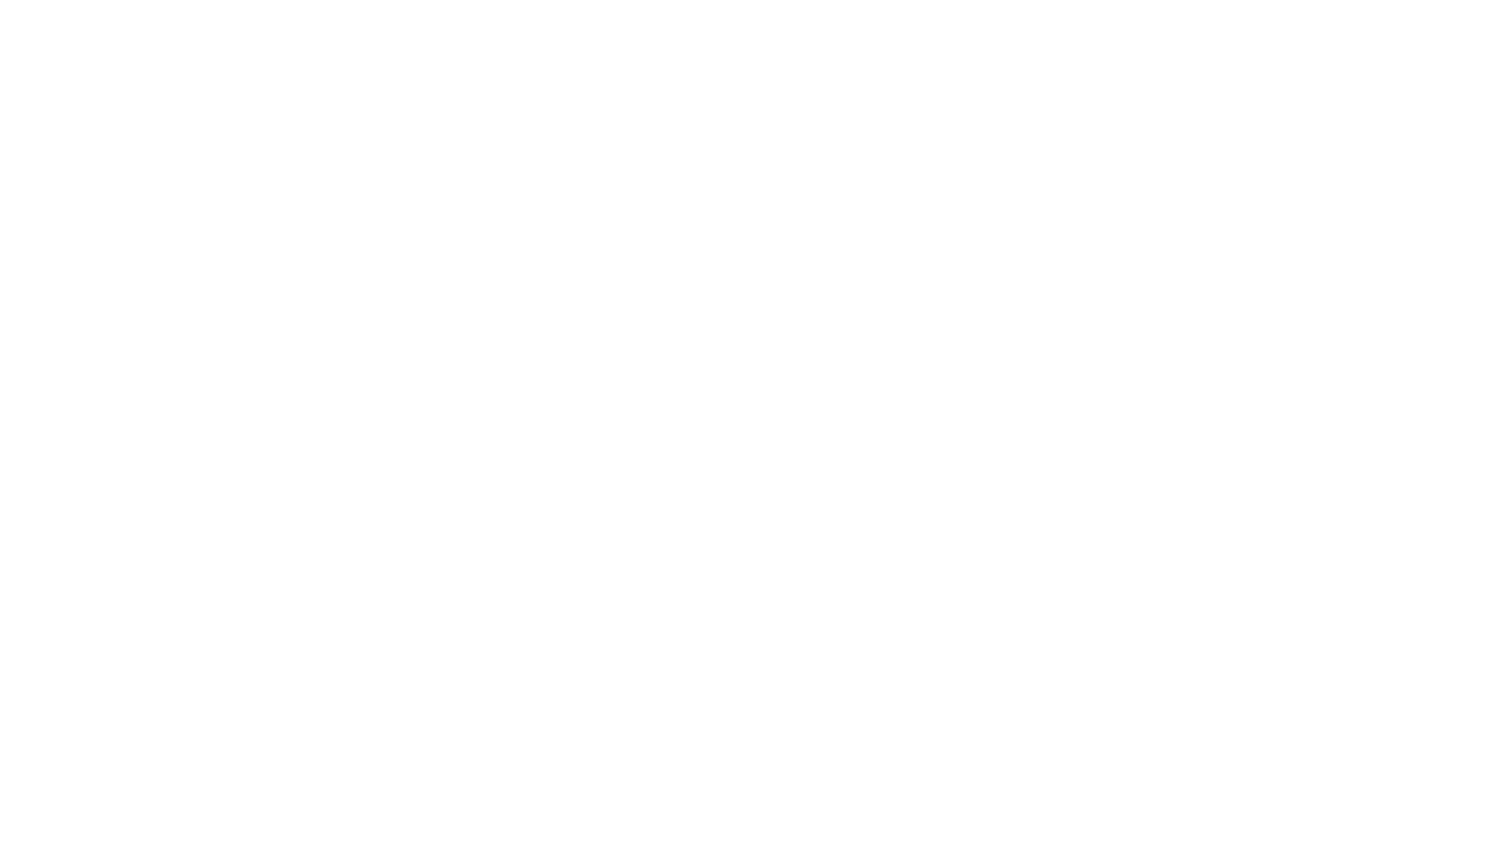 Lincoln Energy Partners